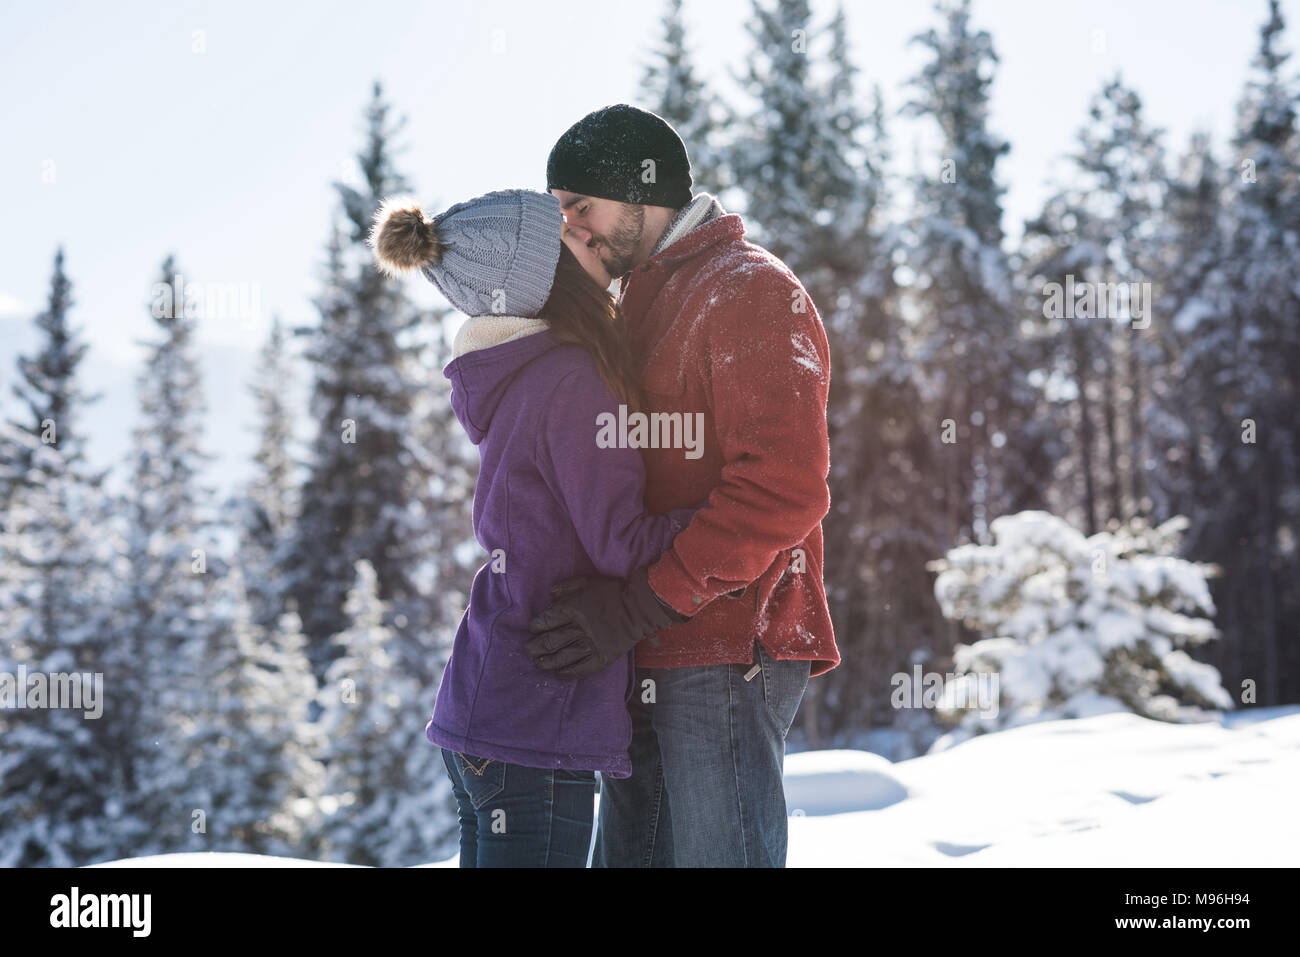 Couple kissing each other in snowy landscape Stock Photo